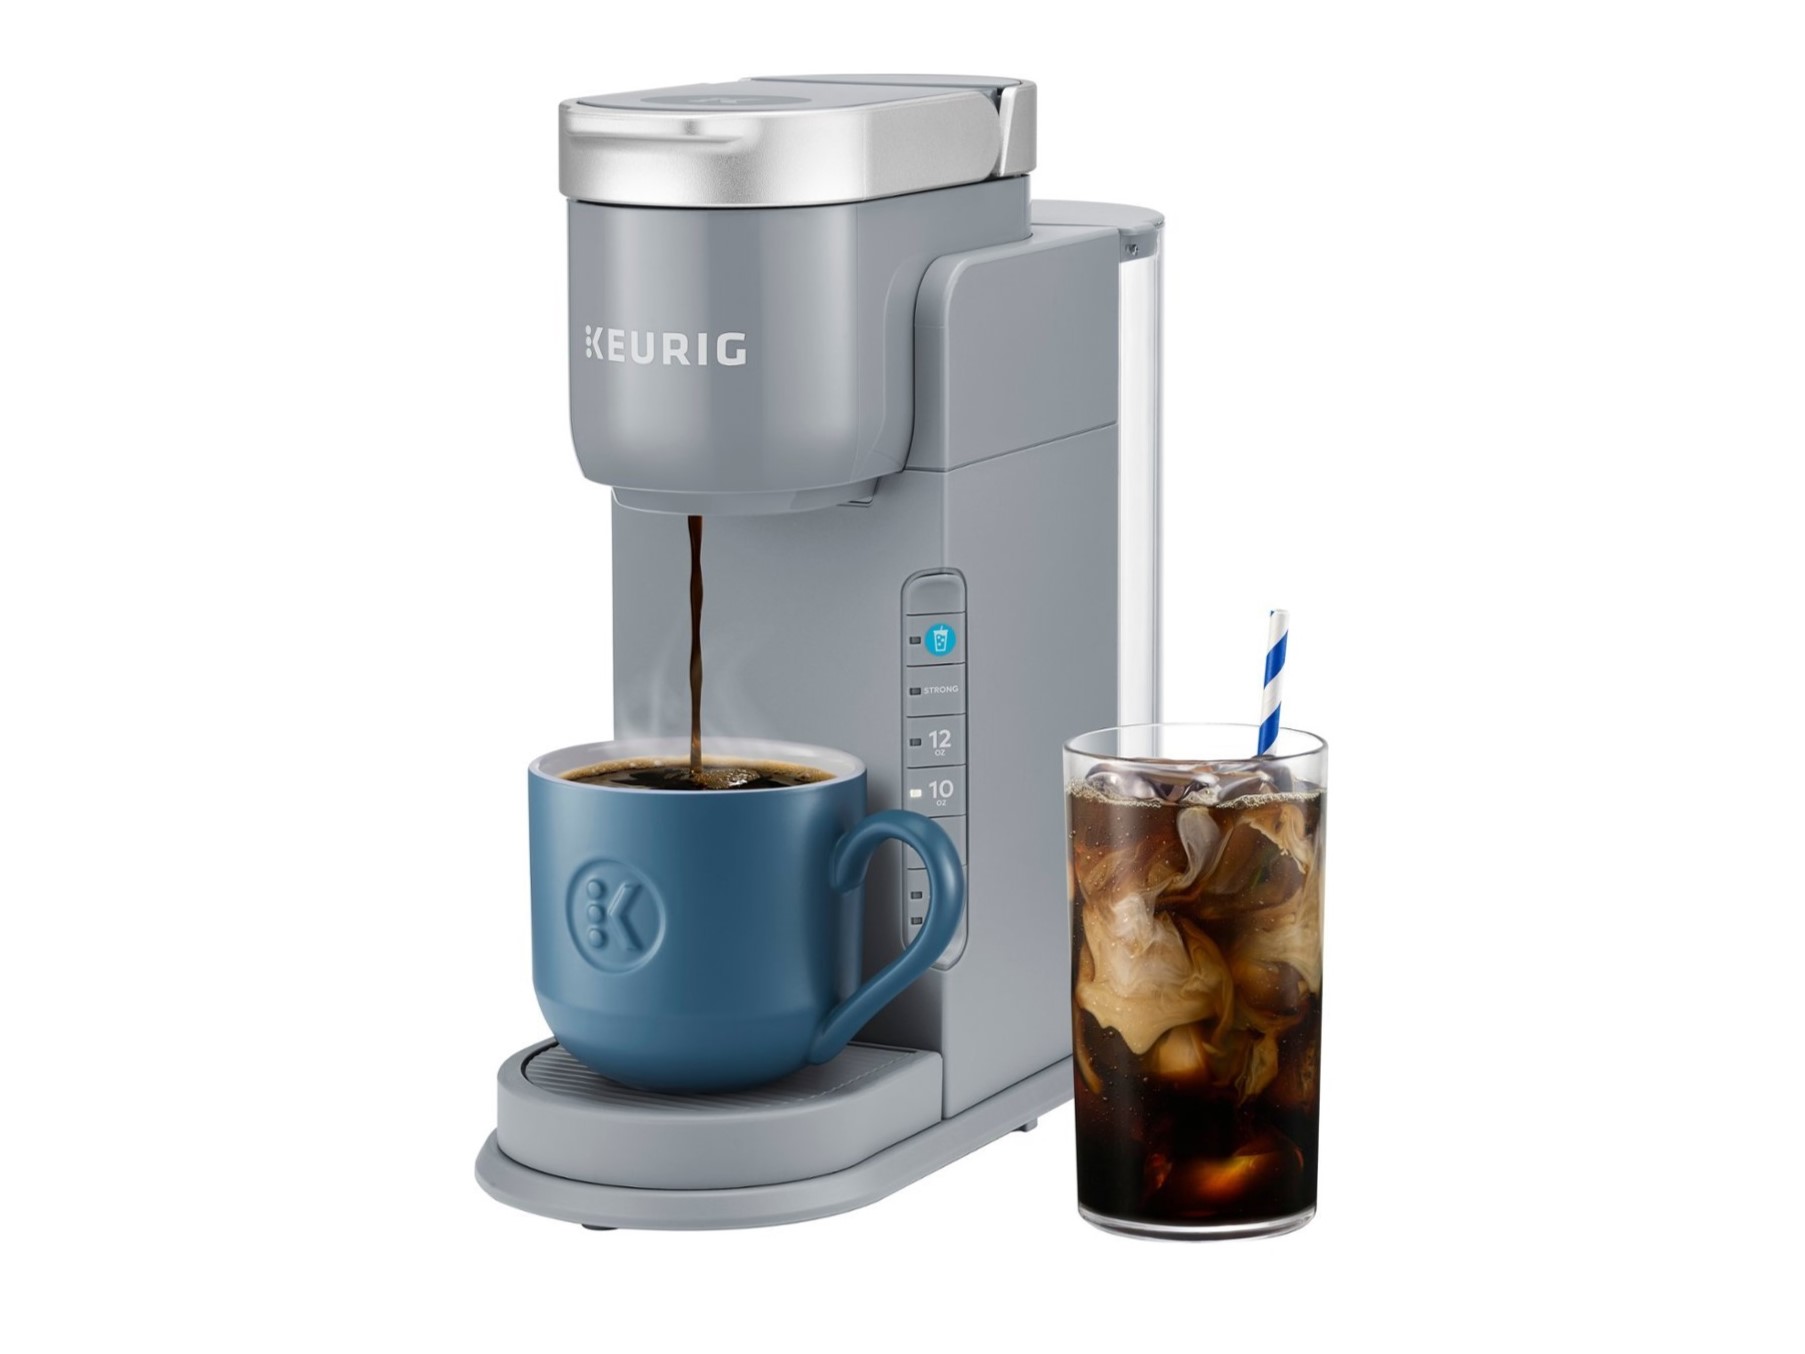 Keurig - ﻿﻿﻿Are you craving some delicious iced coffee or is today looking  more like a hot coffee day? You can now have both with K-Slim + ICED™ brewer.  Always easy, always